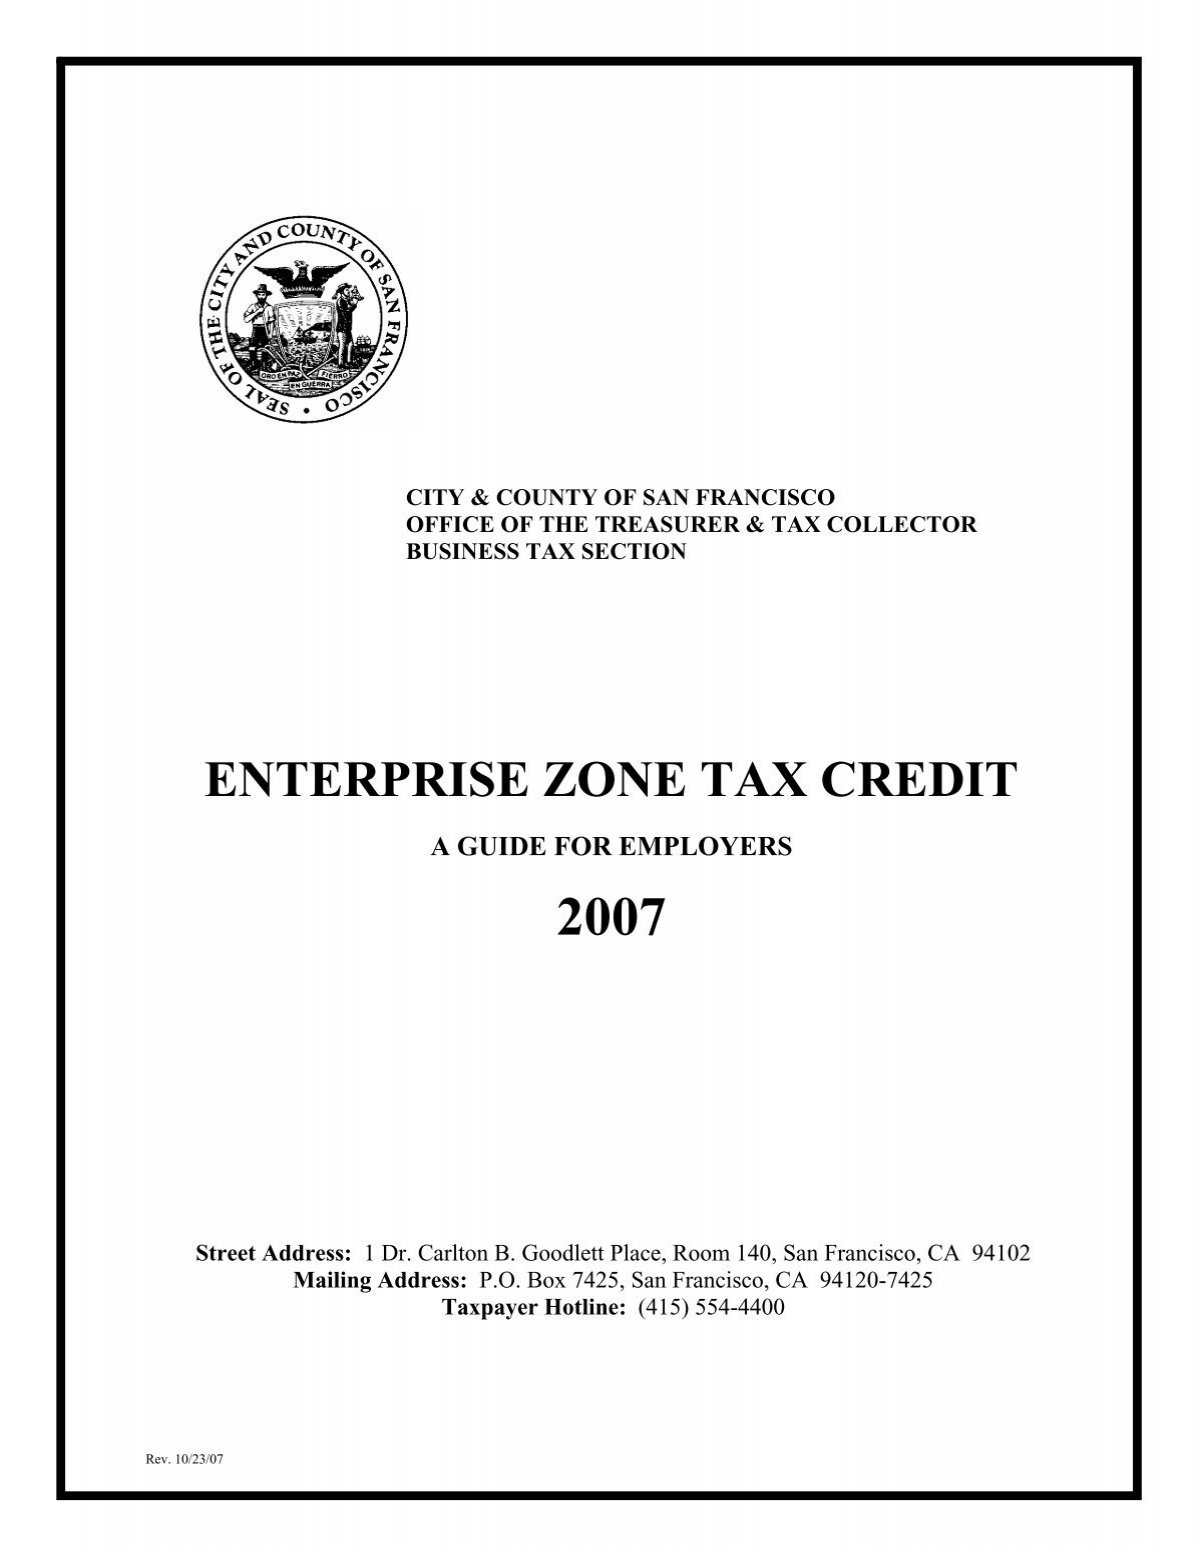 enterprise-zone-tax-credit-office-of-treasurer-and-tax-collector